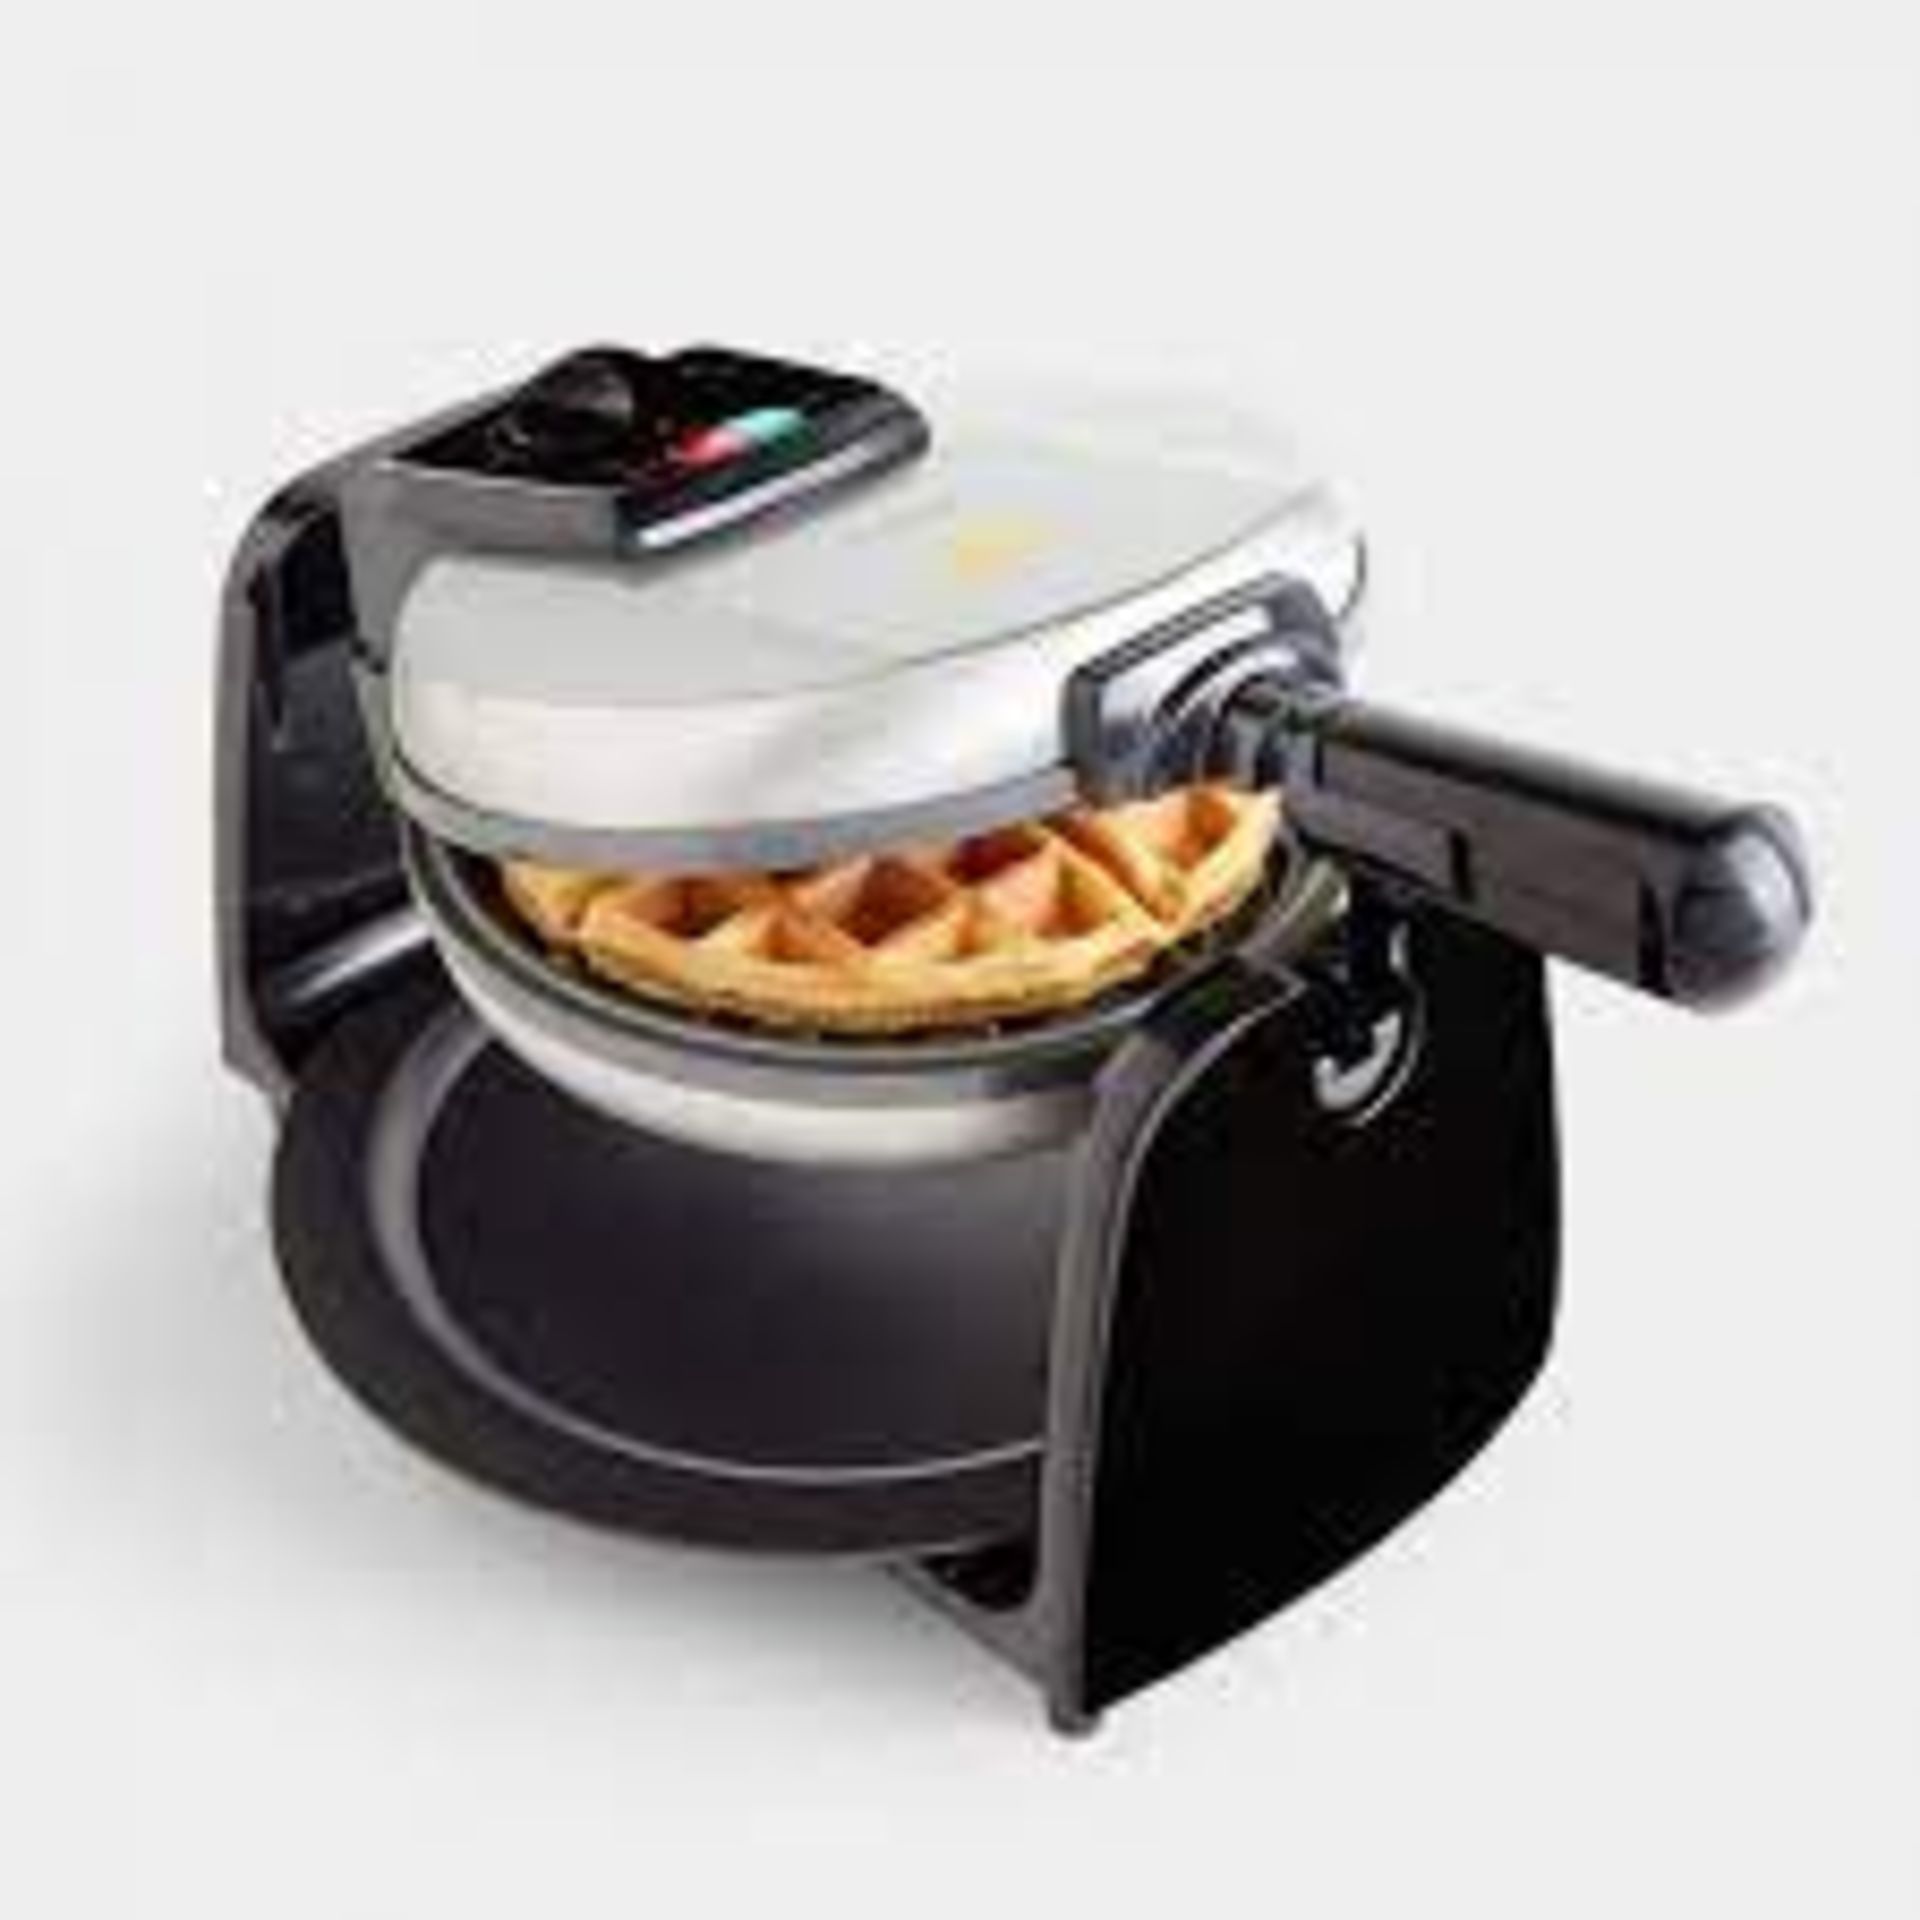 1000w Rotating Waffle Maker. - BI. This rotating waffle maker allows you to evenly spread the batter